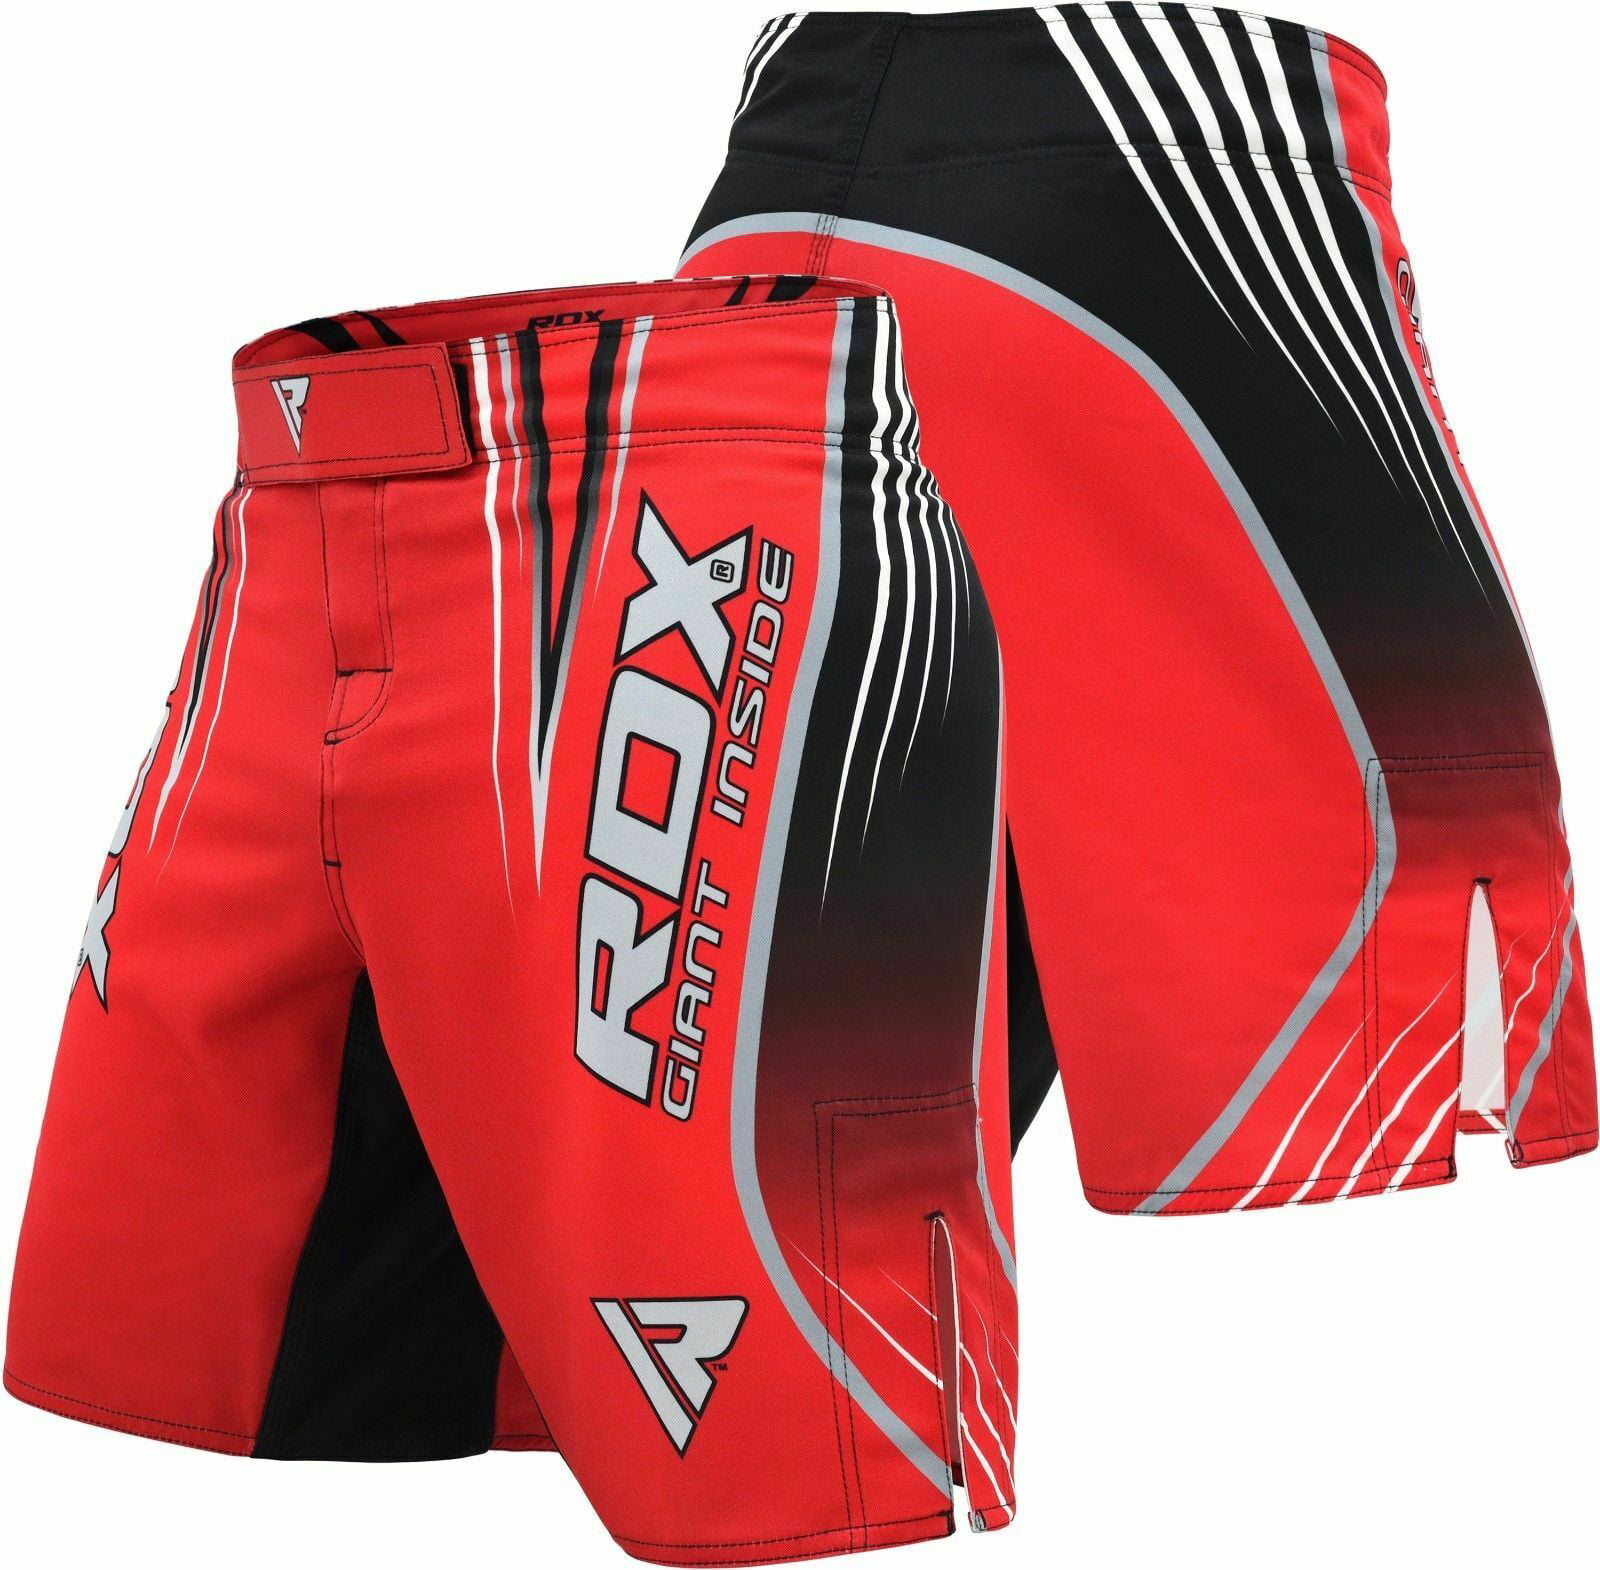 New MMA Fight GYM Shorts Grappling Short Kick Boxing Cage Fighting Shorts Brand 